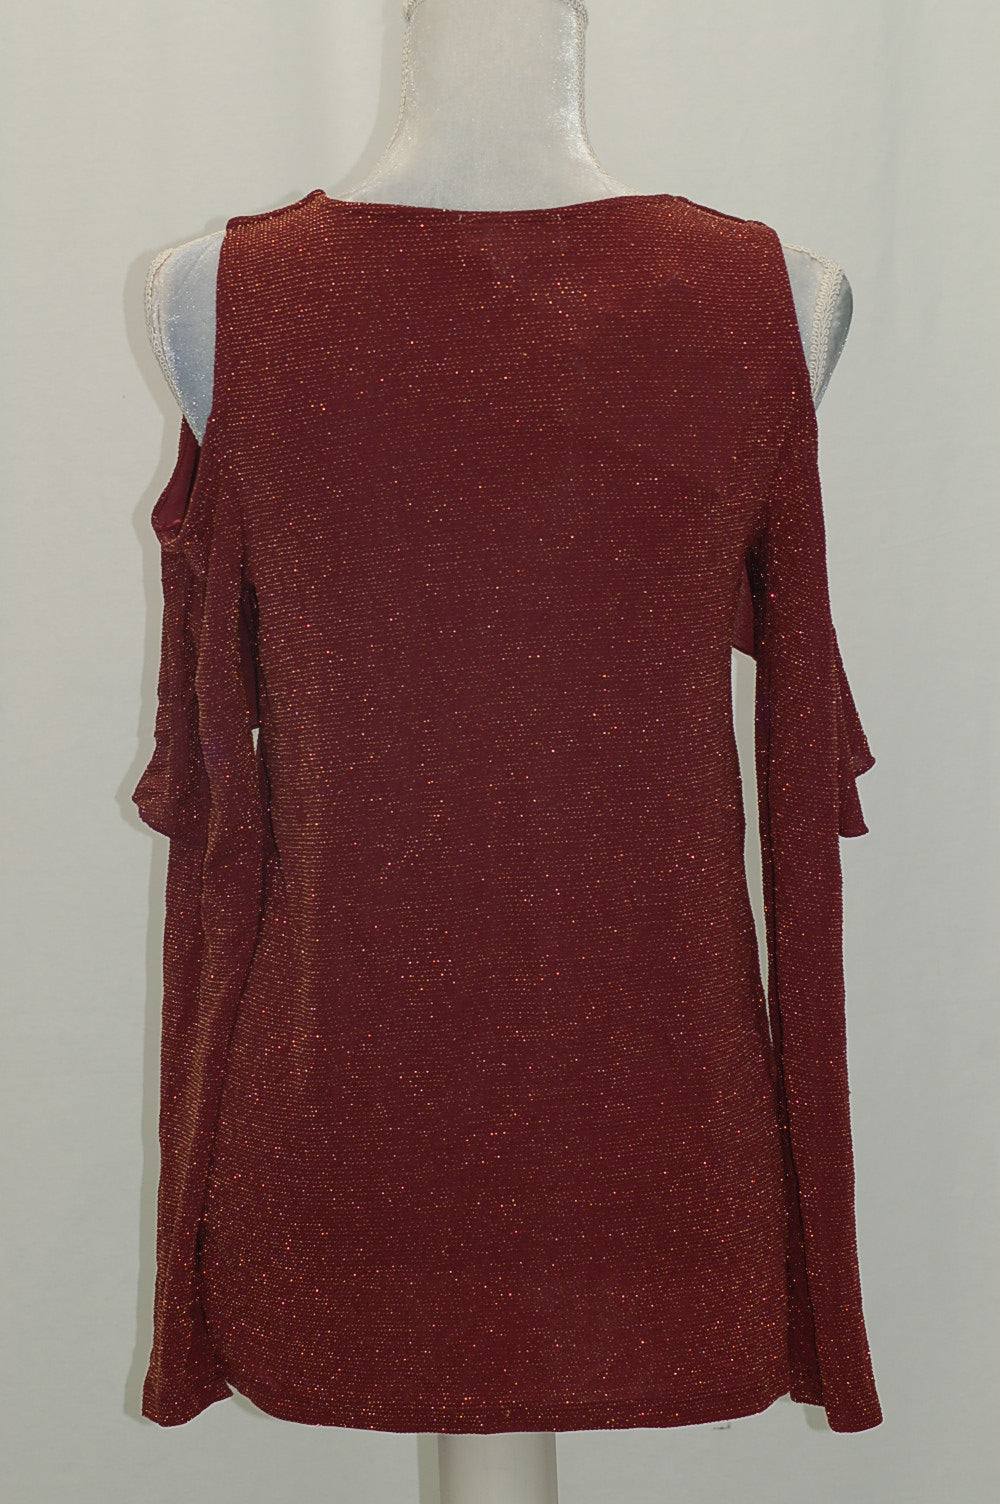 Michael Kors Ruffled Top, Red Size Small - New Without Tag 14860